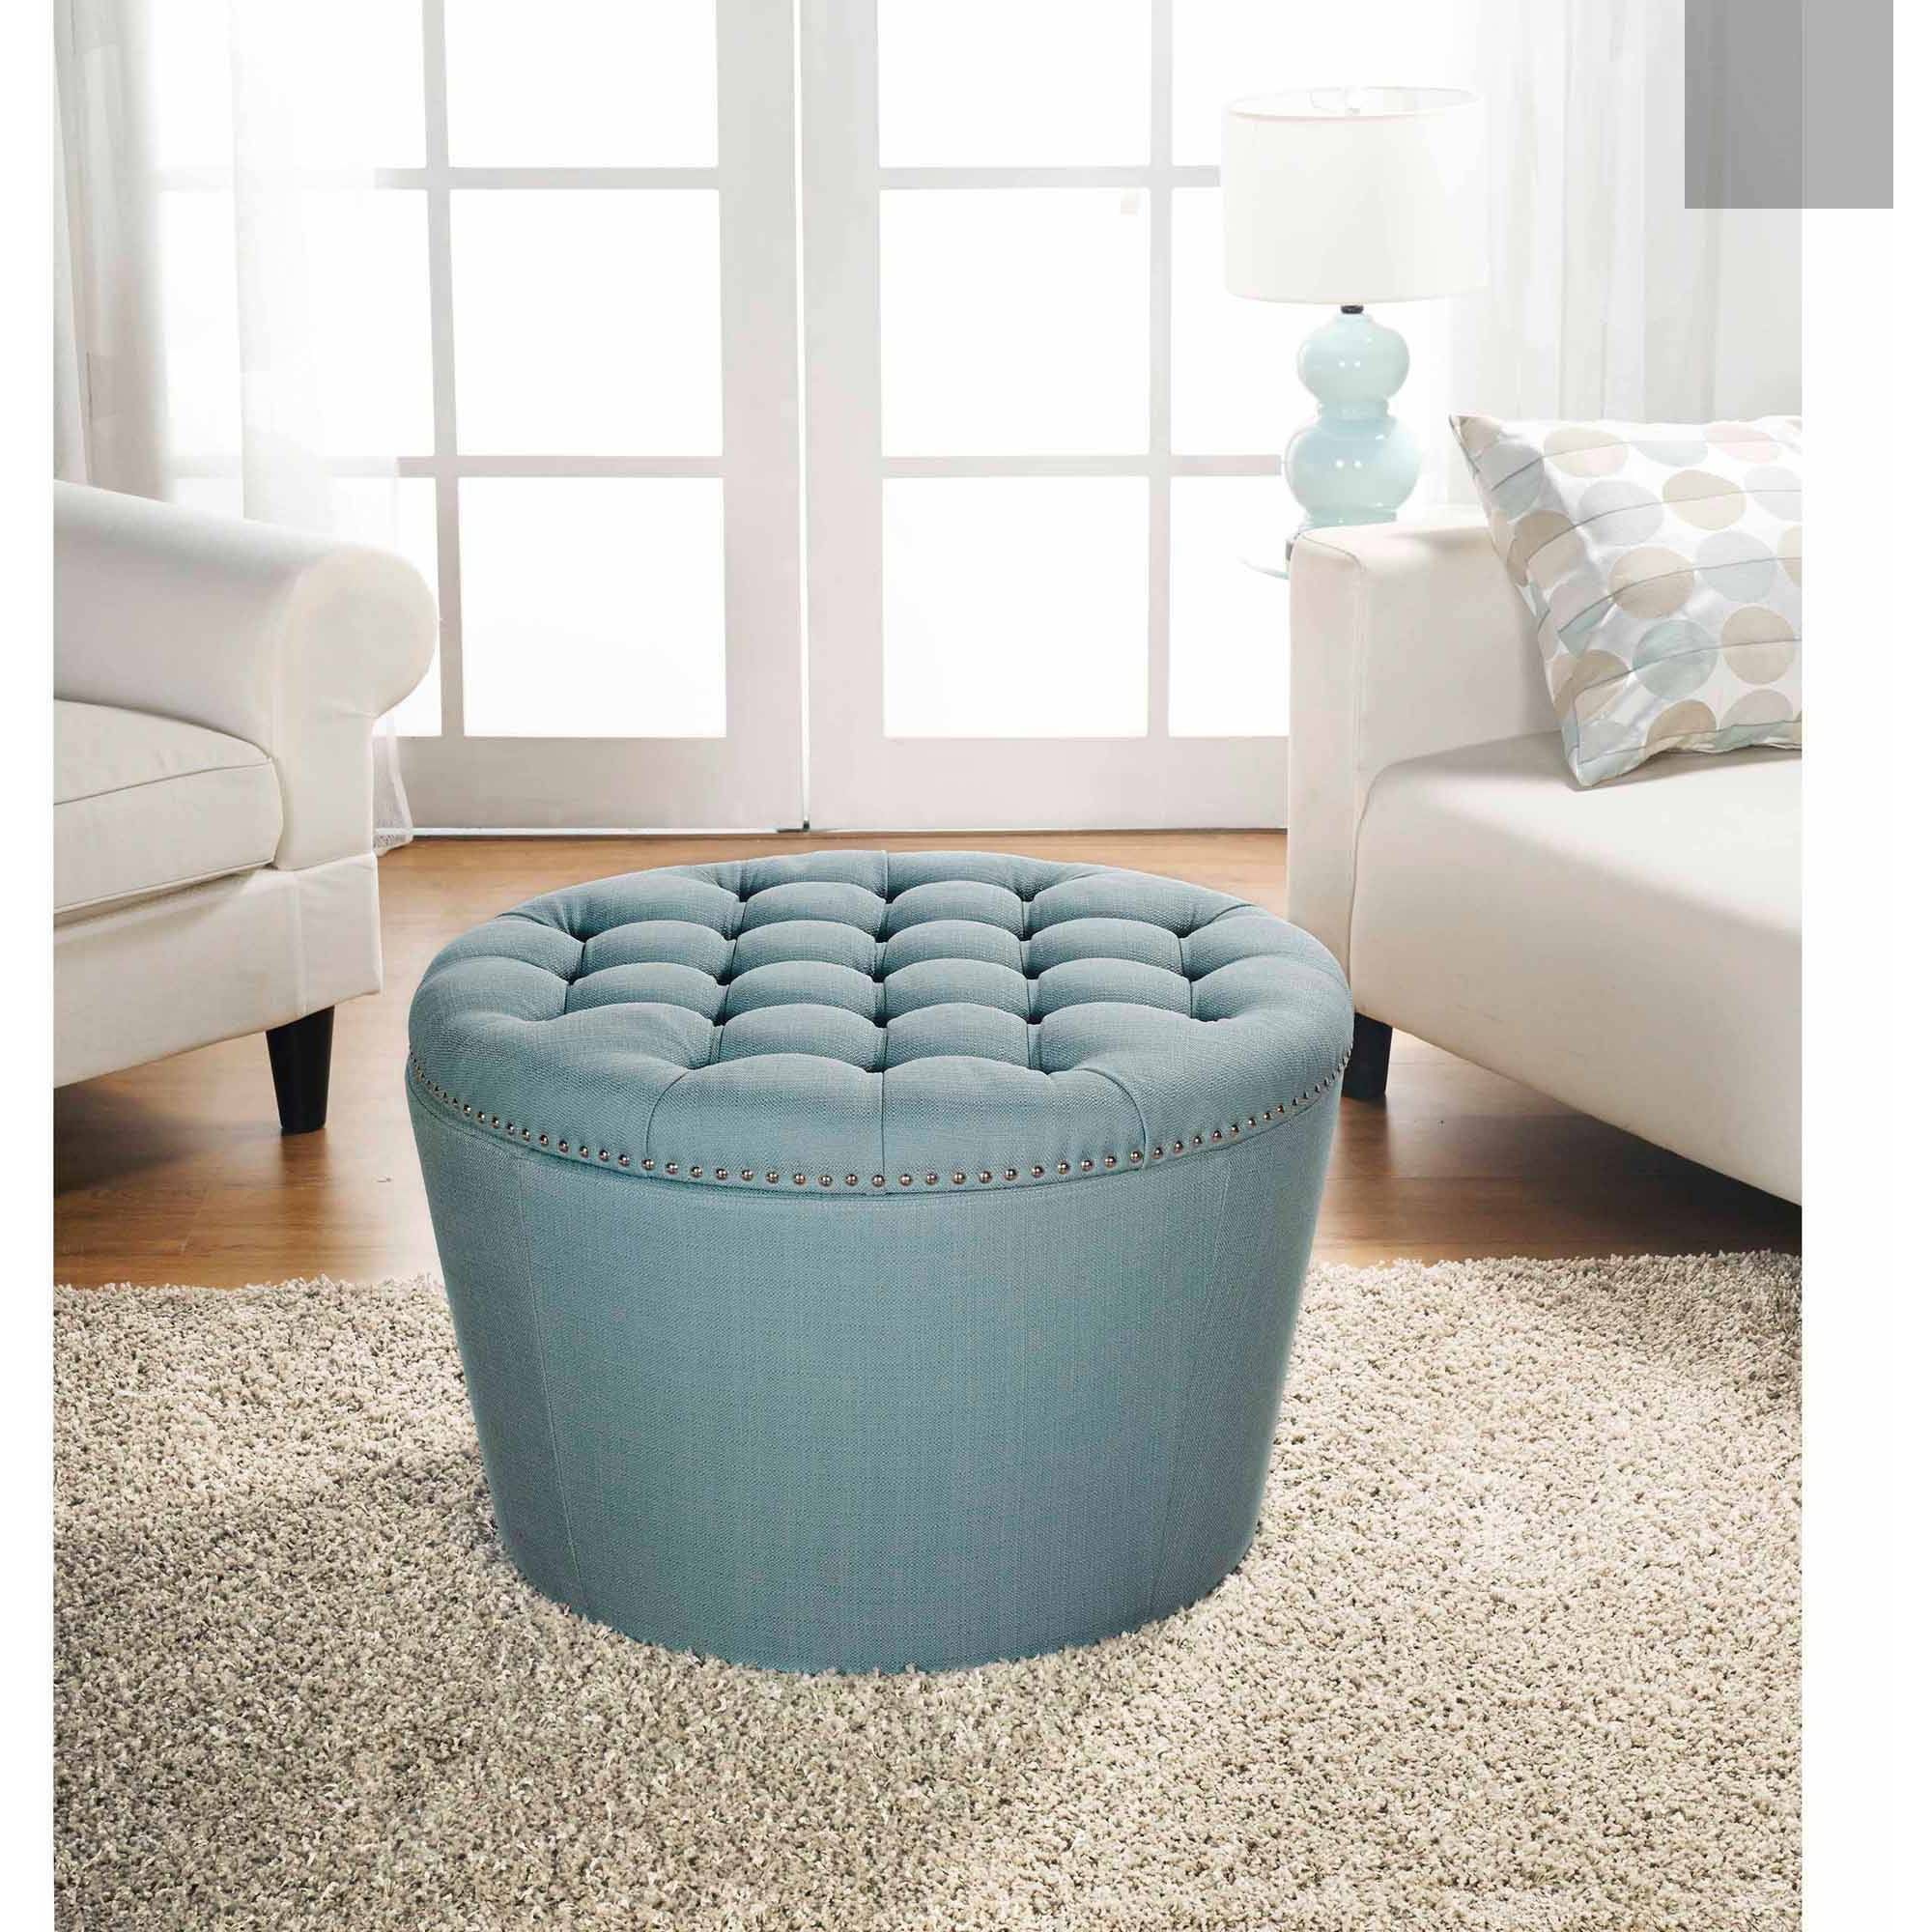 Better Homes And Gardens Round Tufted Storage Ottoman With Nailheads With Regard To Popular Blue Round Storage Ottomans Set Of  (View 10 of 10)